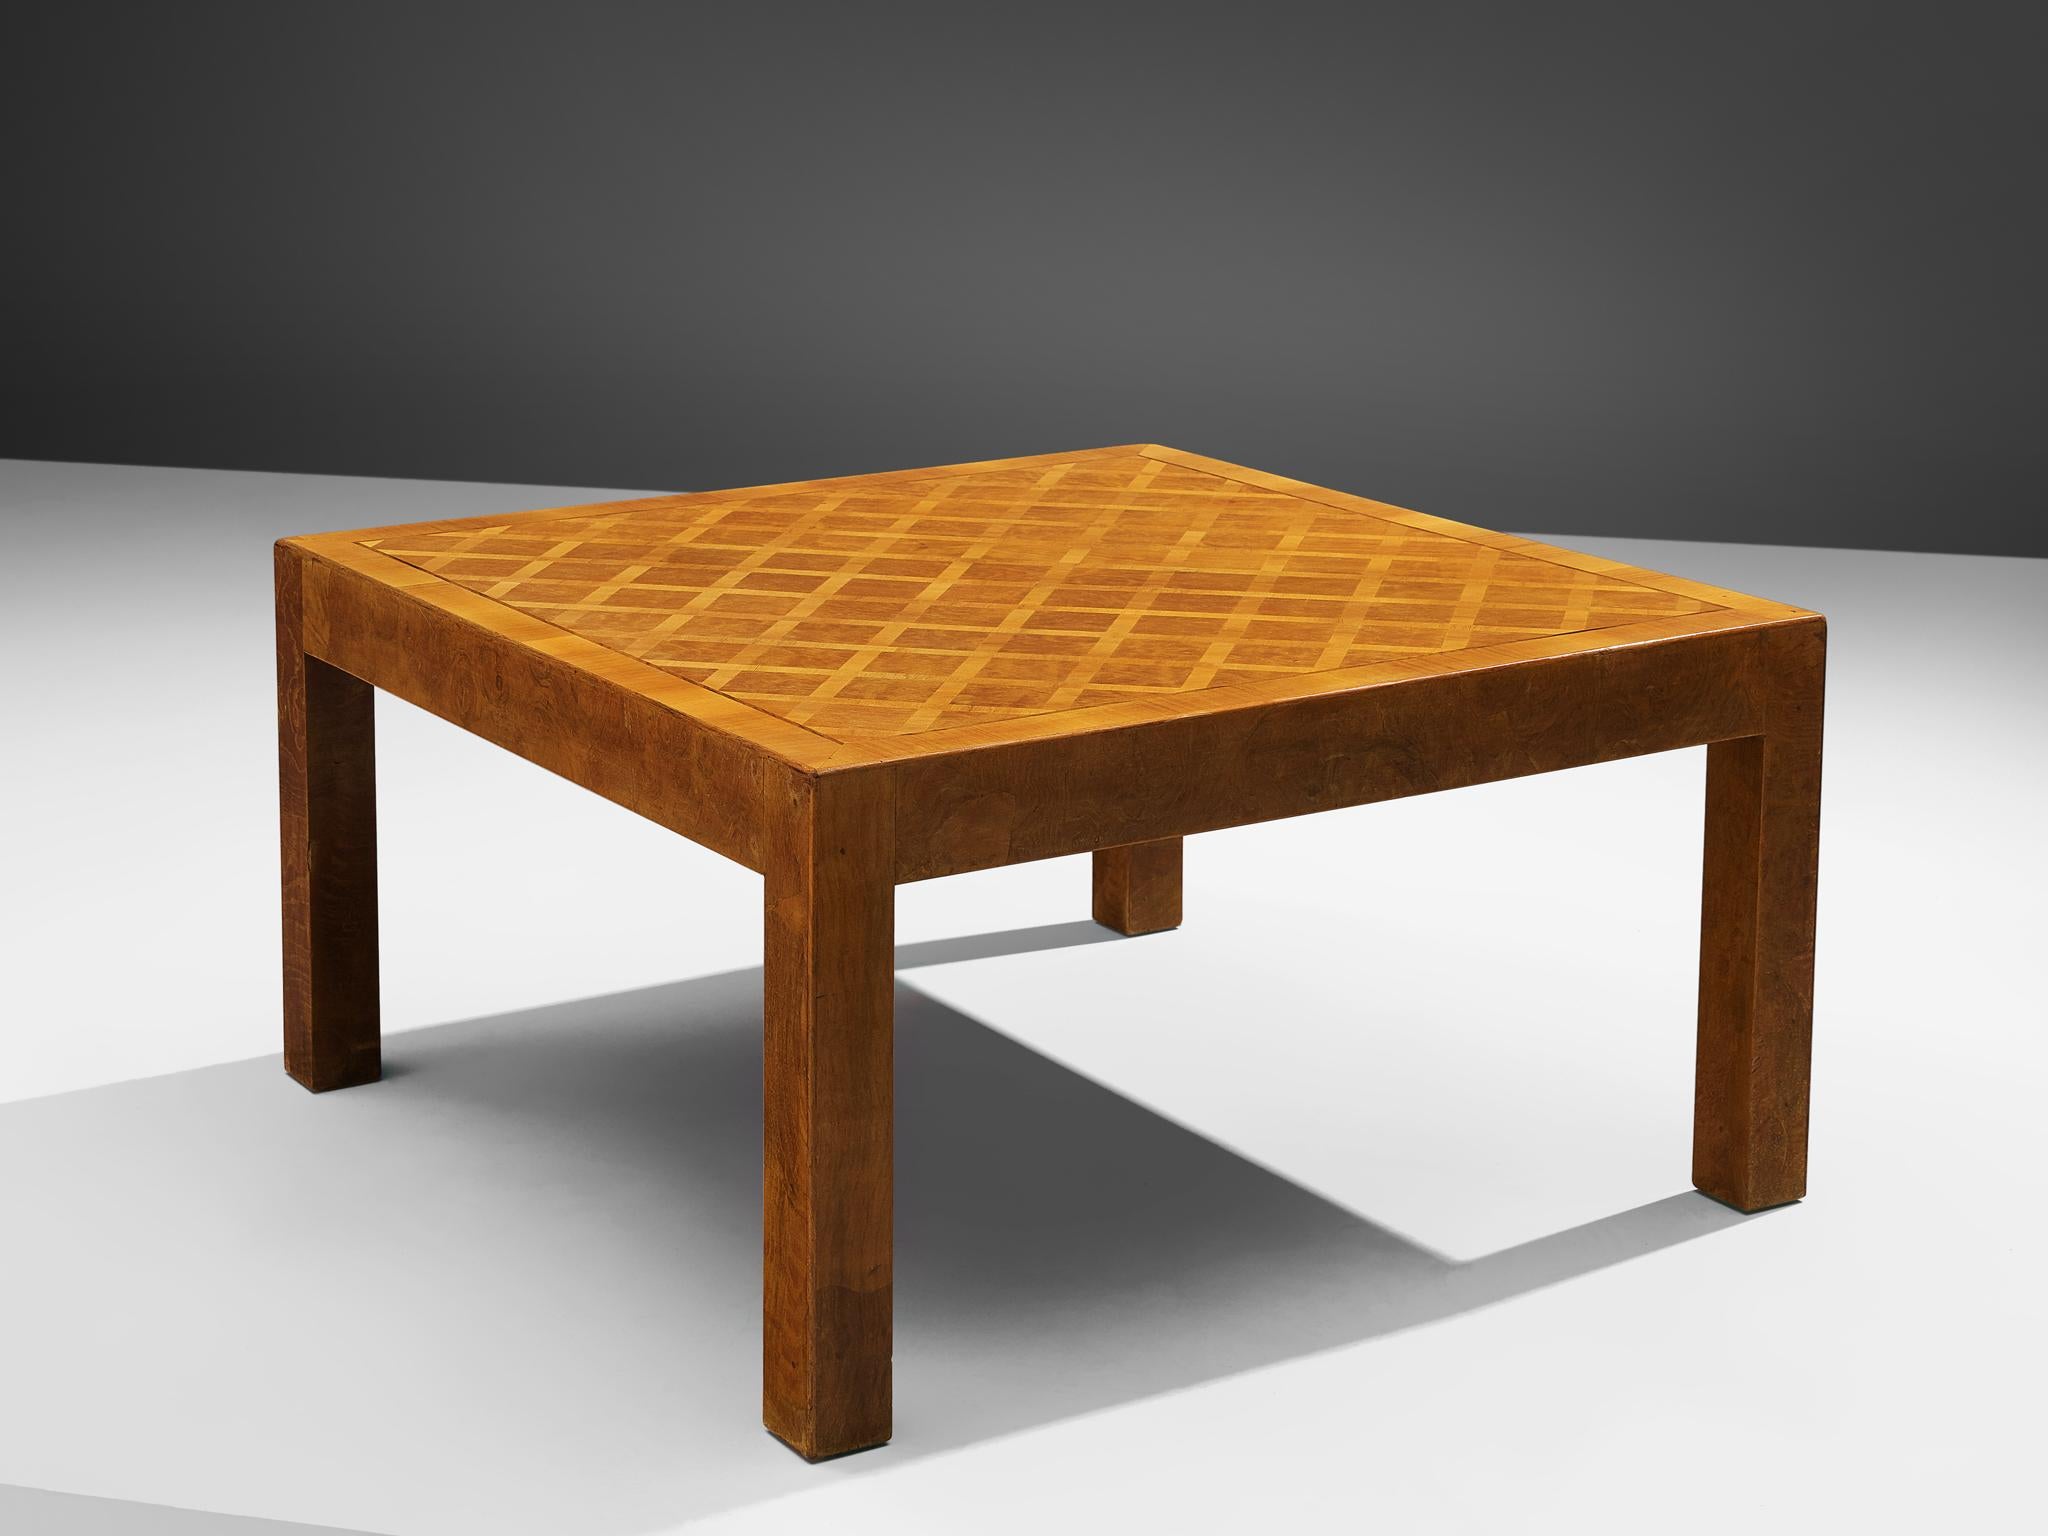 Square coffee table, walnut parquetry, Europe, 1960s.

Square coffee table with straight legs in walnut. A clean and geometrical appearance is the result of a modest design. Elegance can be found in the details. The top of this table is inlayed with